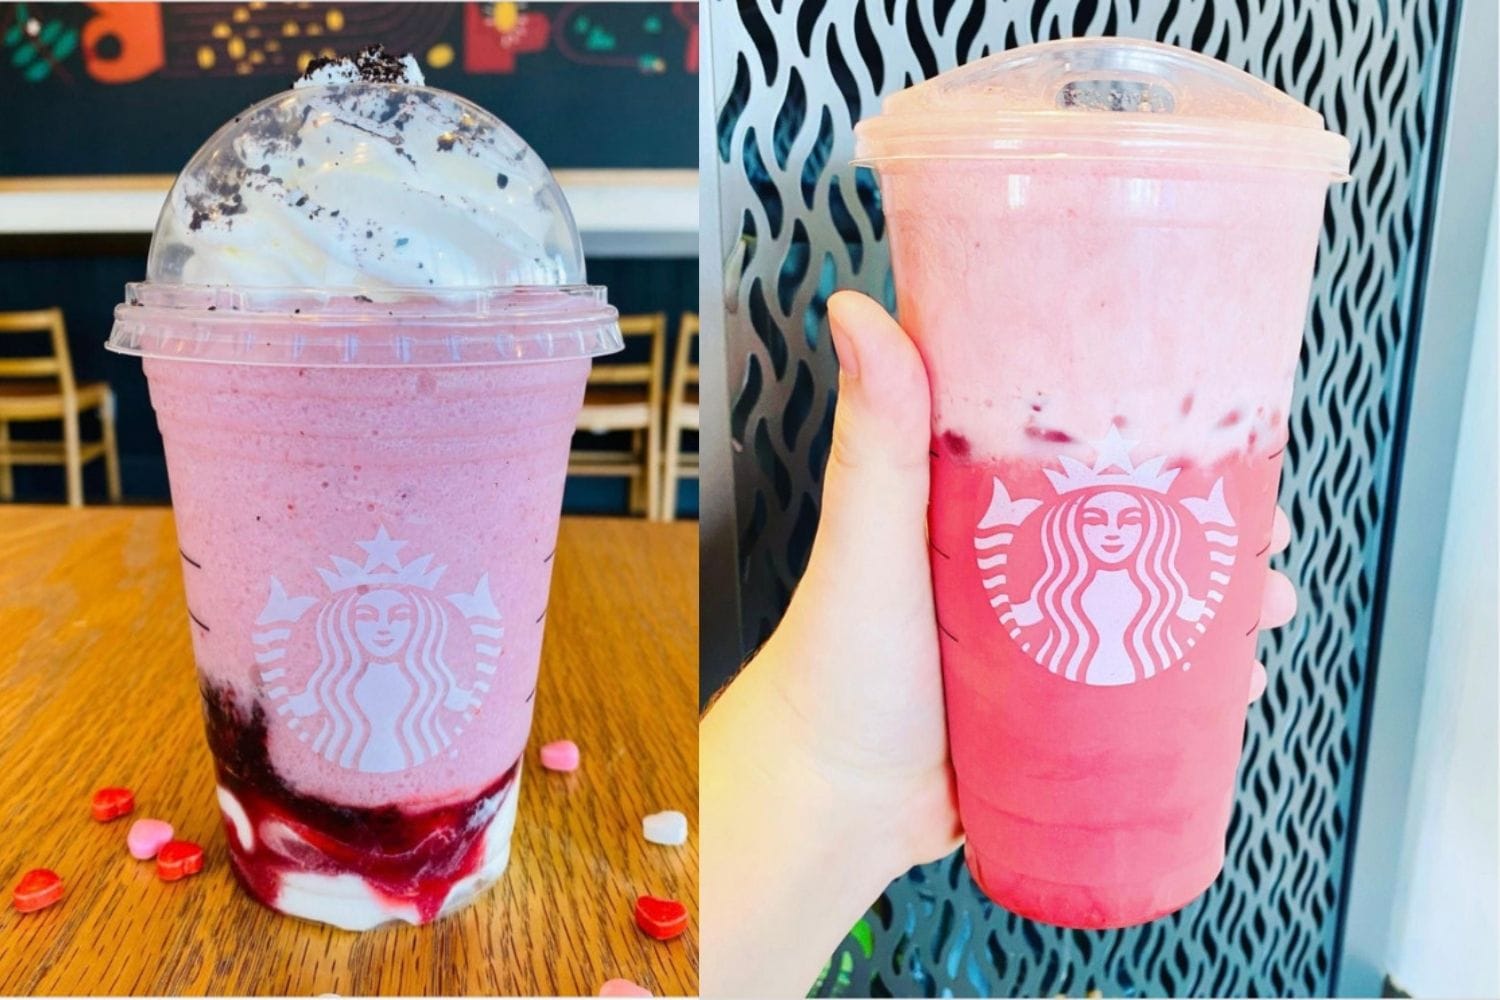 Starbucks' Valentine's Day 2022 Cups Are IG-Worthy Pinks & Reds